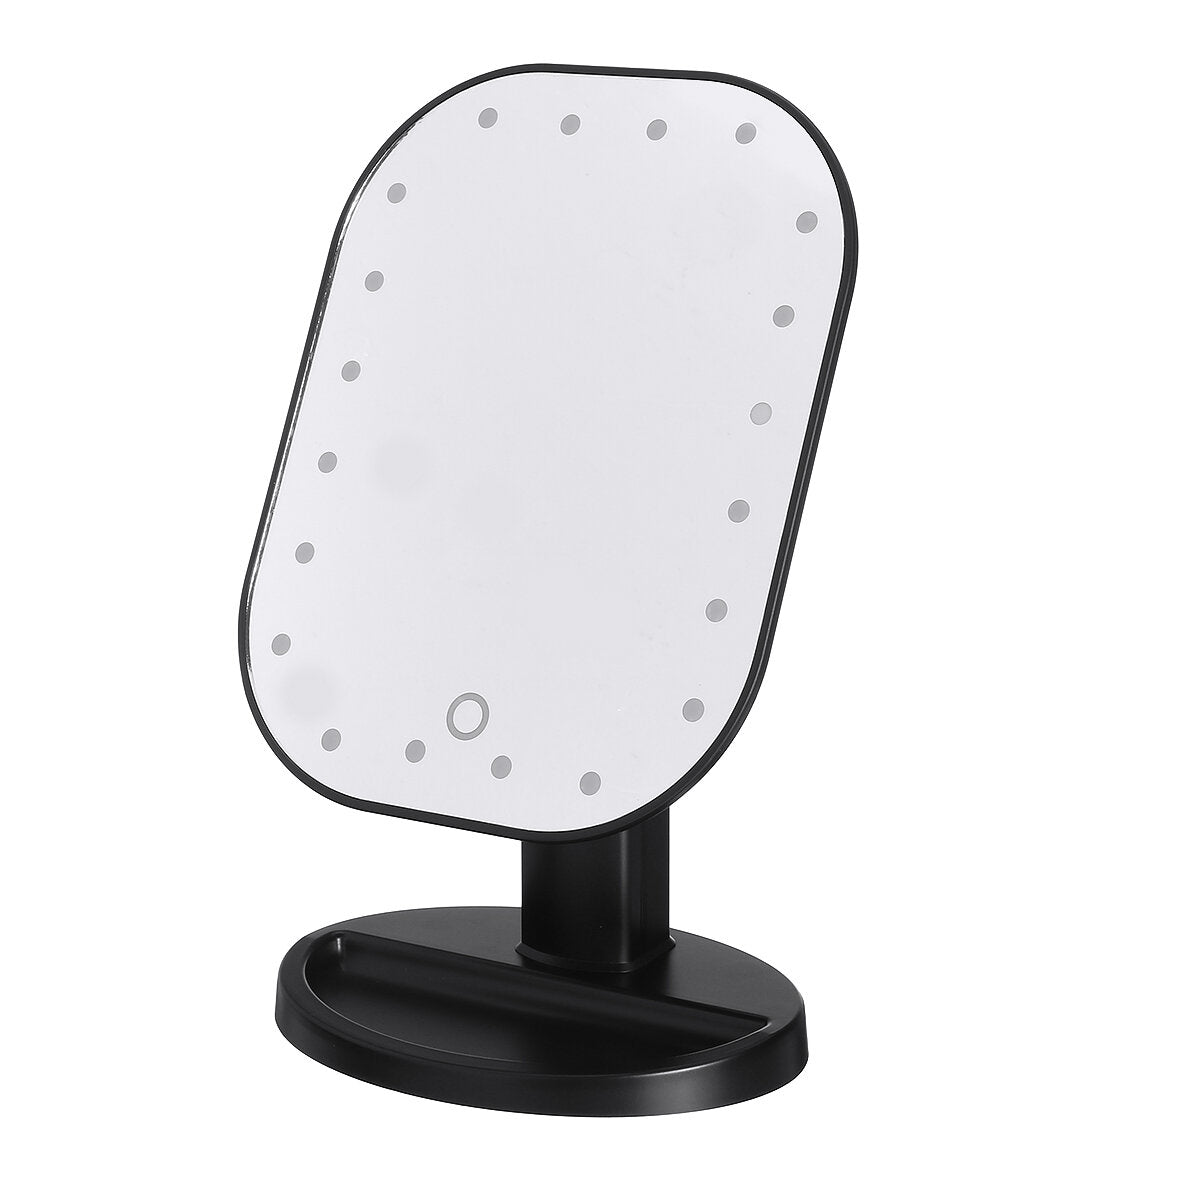 Battery Powered 20 LED Makeup Mirror Light Desktop Home Touch Screen 180 Adjustable Angle Mirror